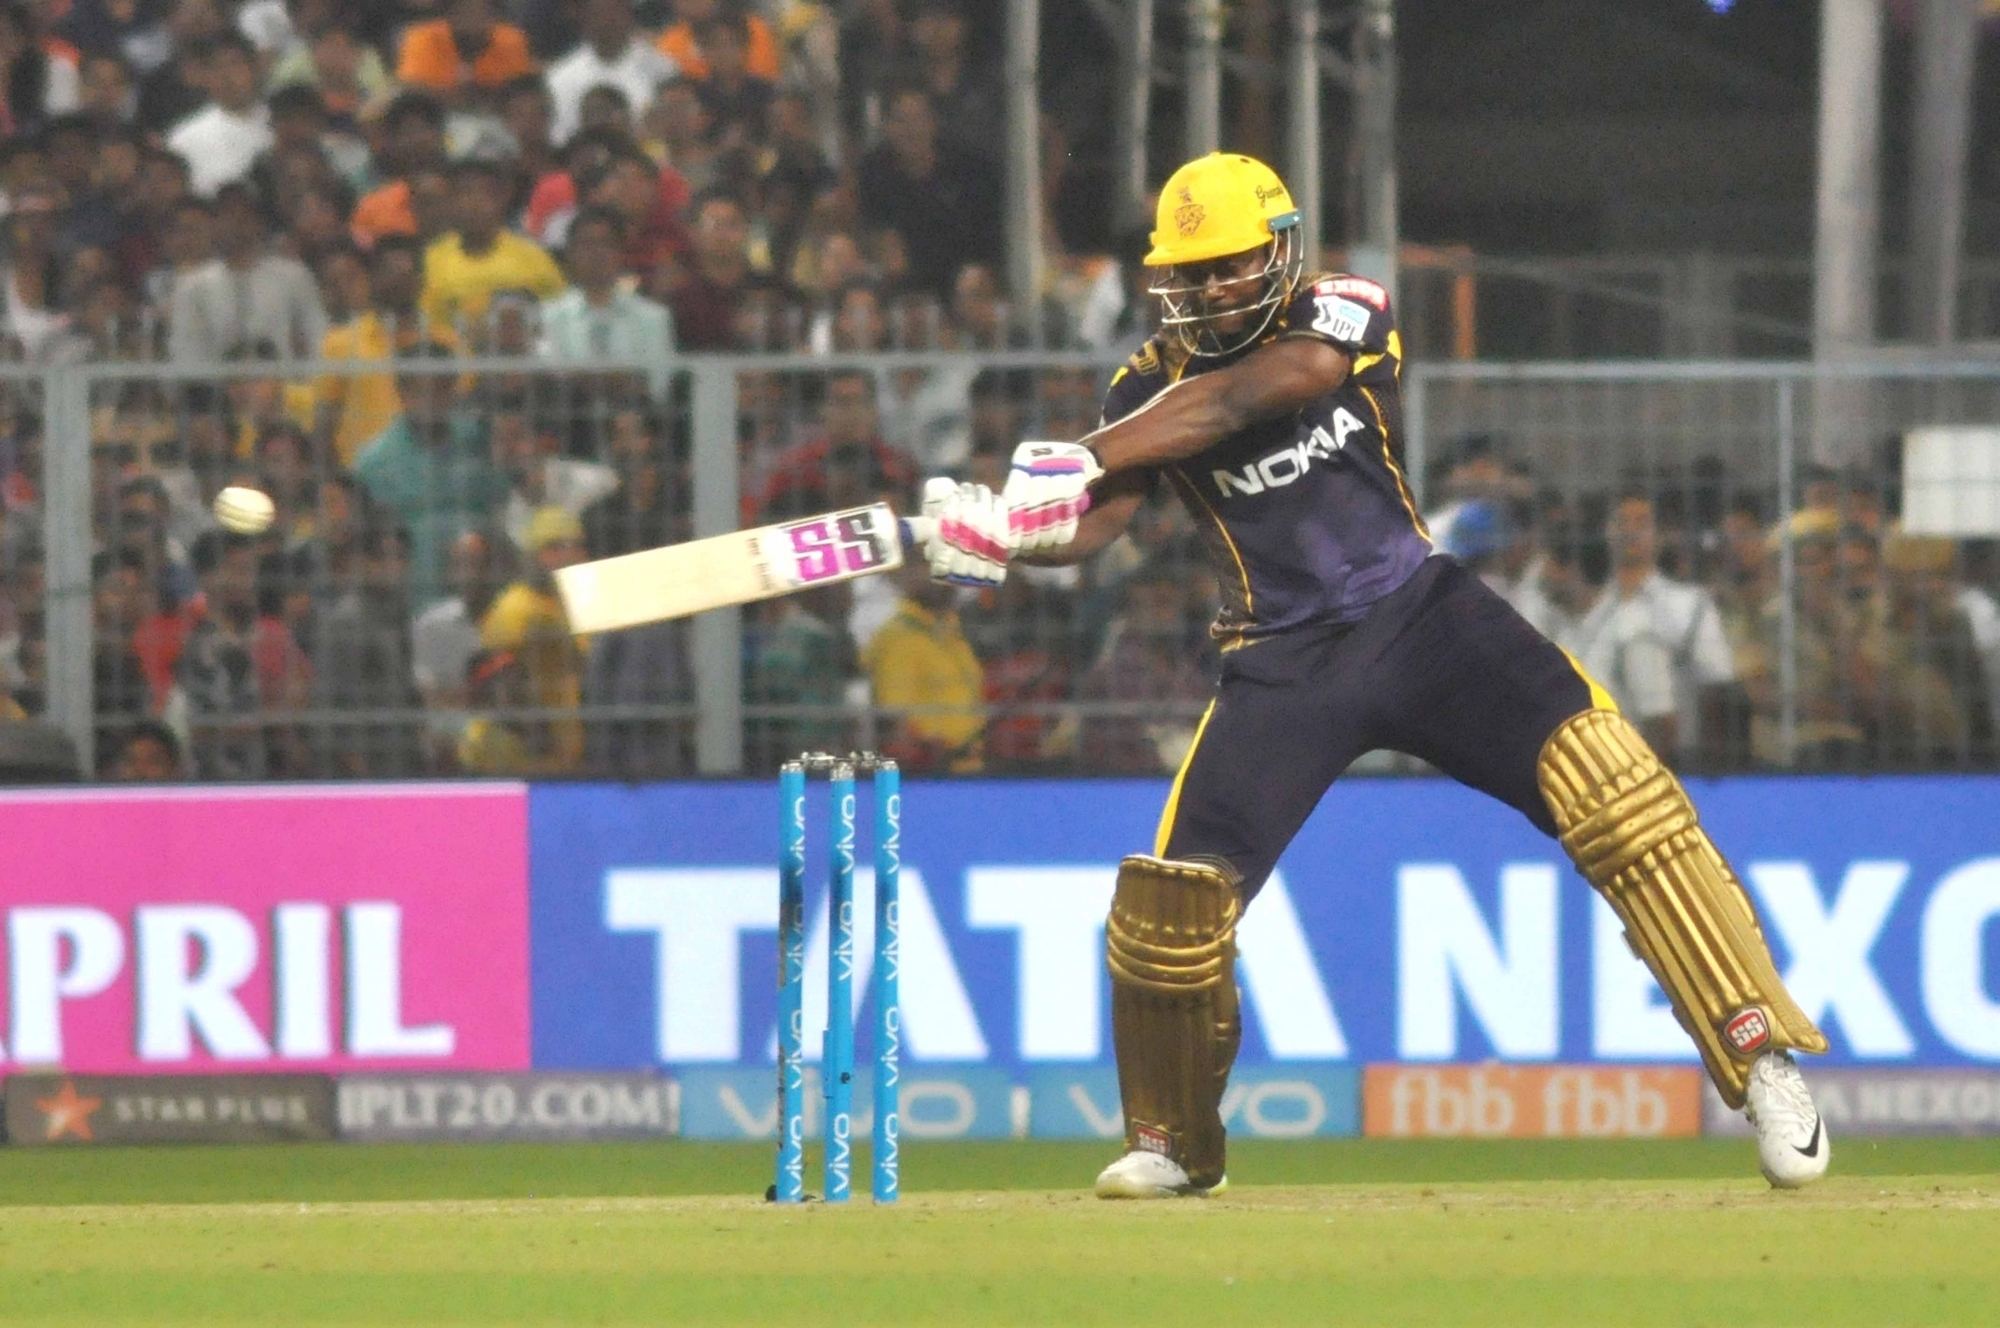 Andre Russell scored 49* off 19 balls | IANS